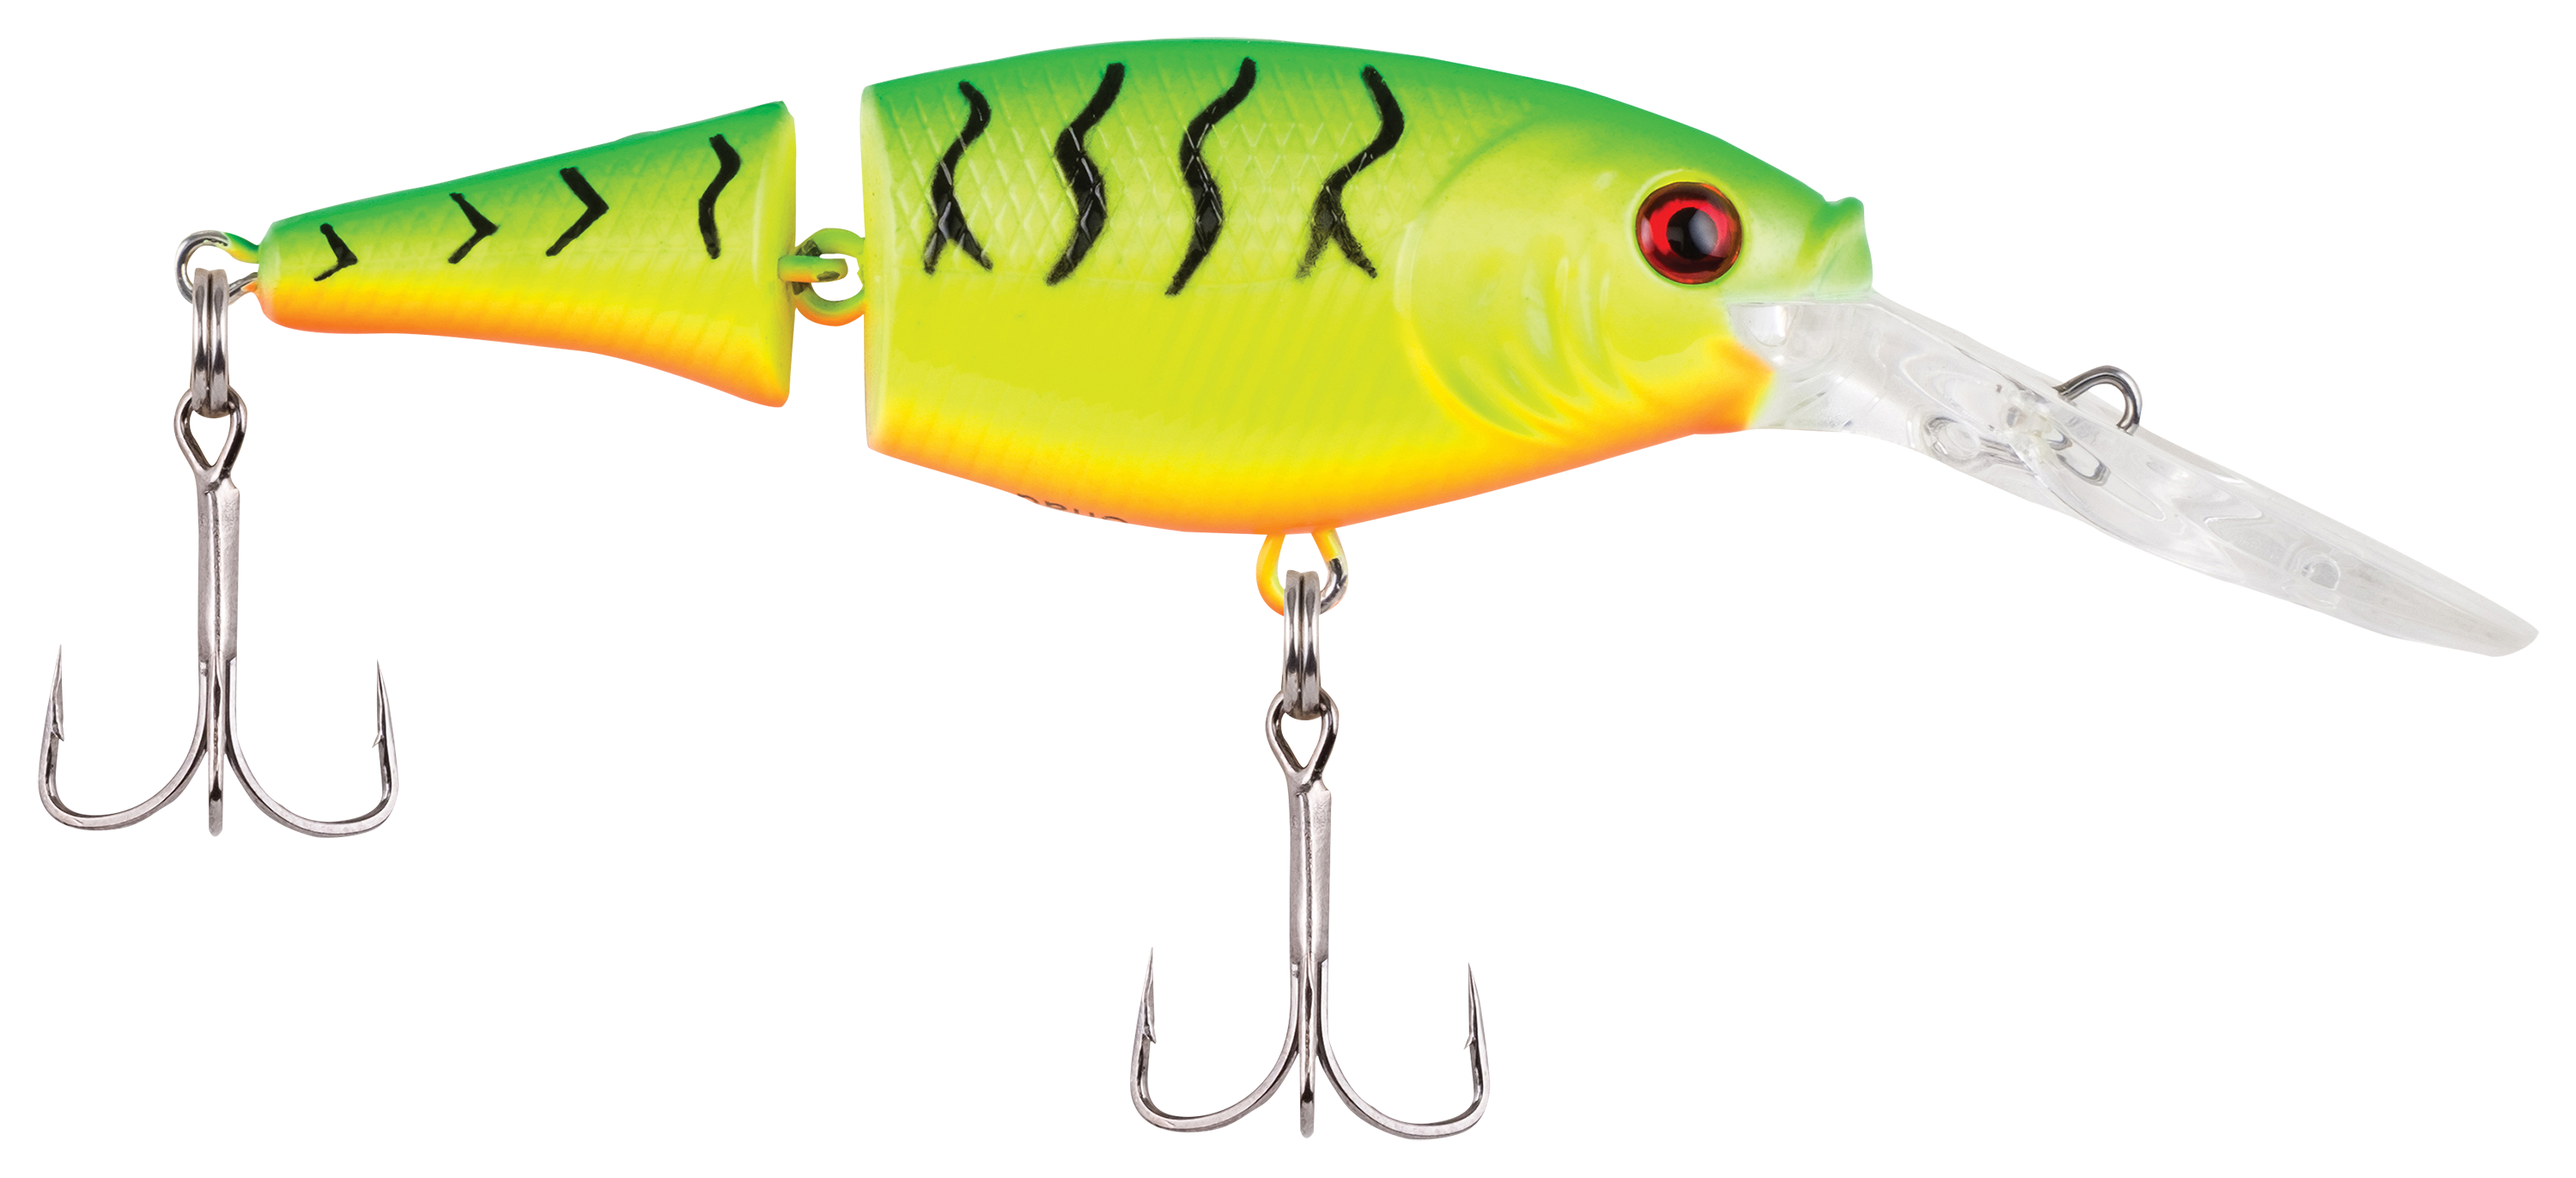  Berkley Flicker Shad Jointed Fishing Lure, Clear, 1/3 Oz, 2  3/4in 7cm Crankbaits, Size, Profile And Dive Depth Imitates Real Shad,  Equipped